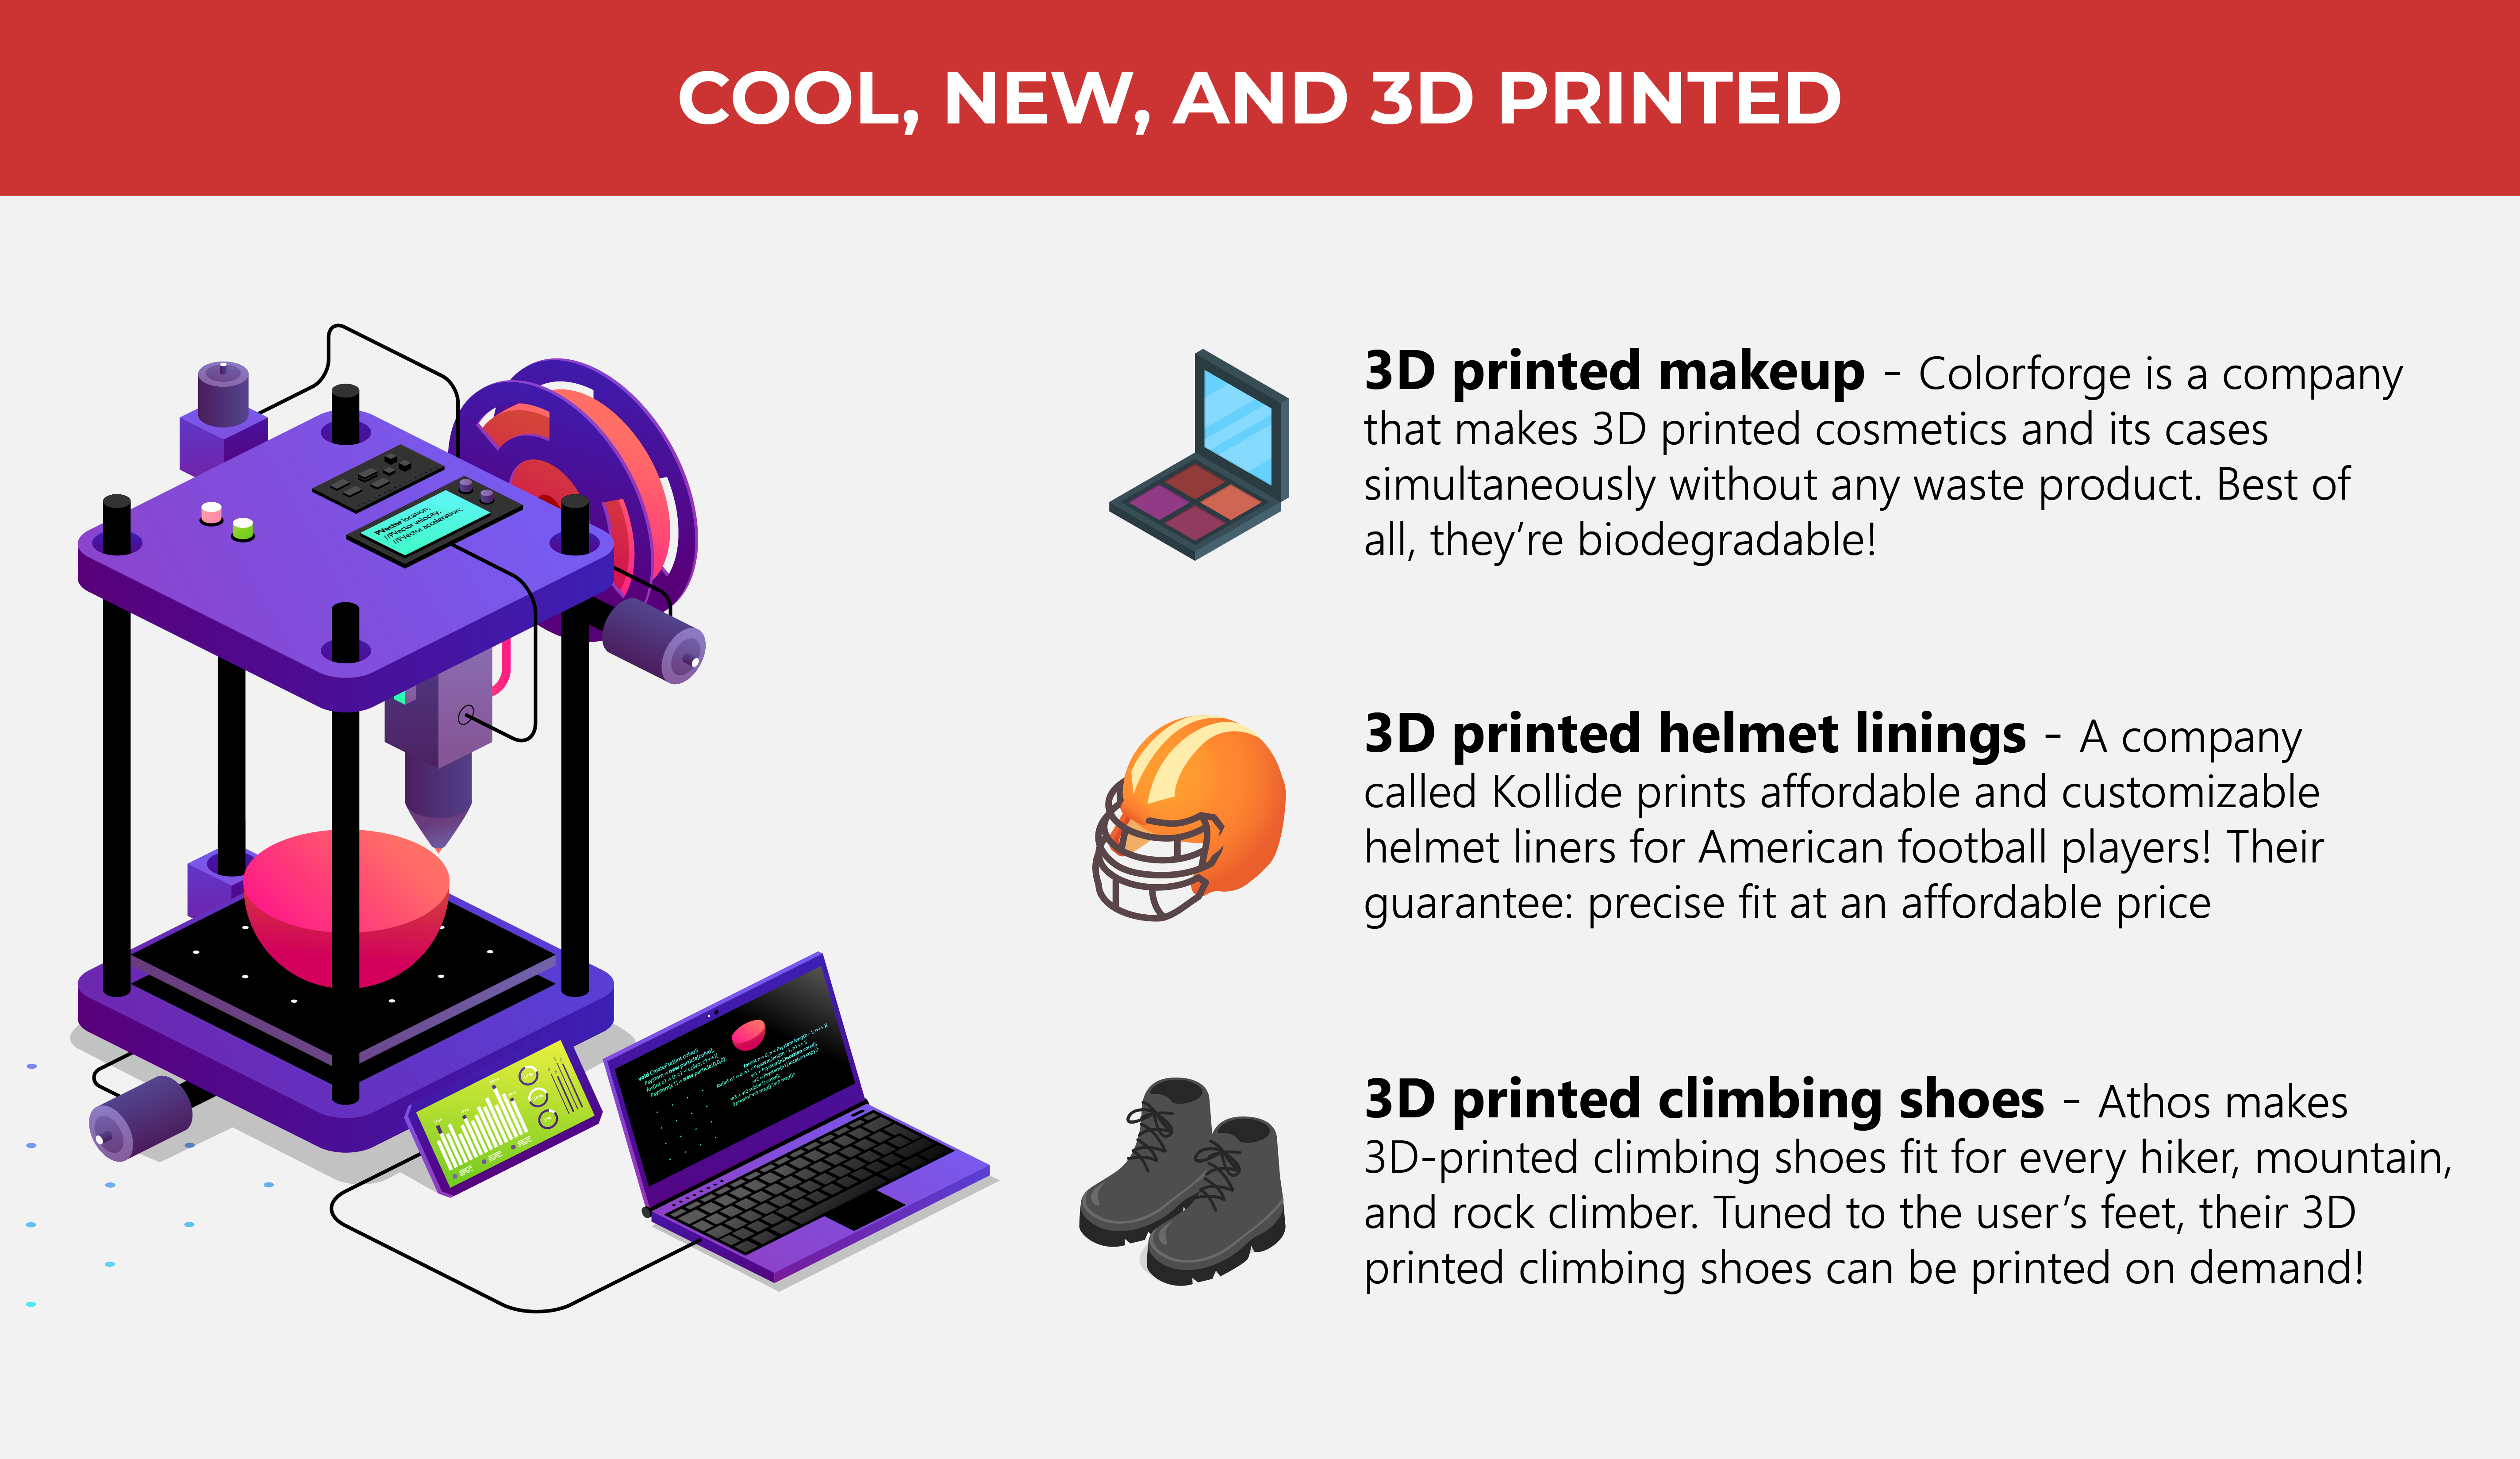 It’s a Bold New 3D Printed World